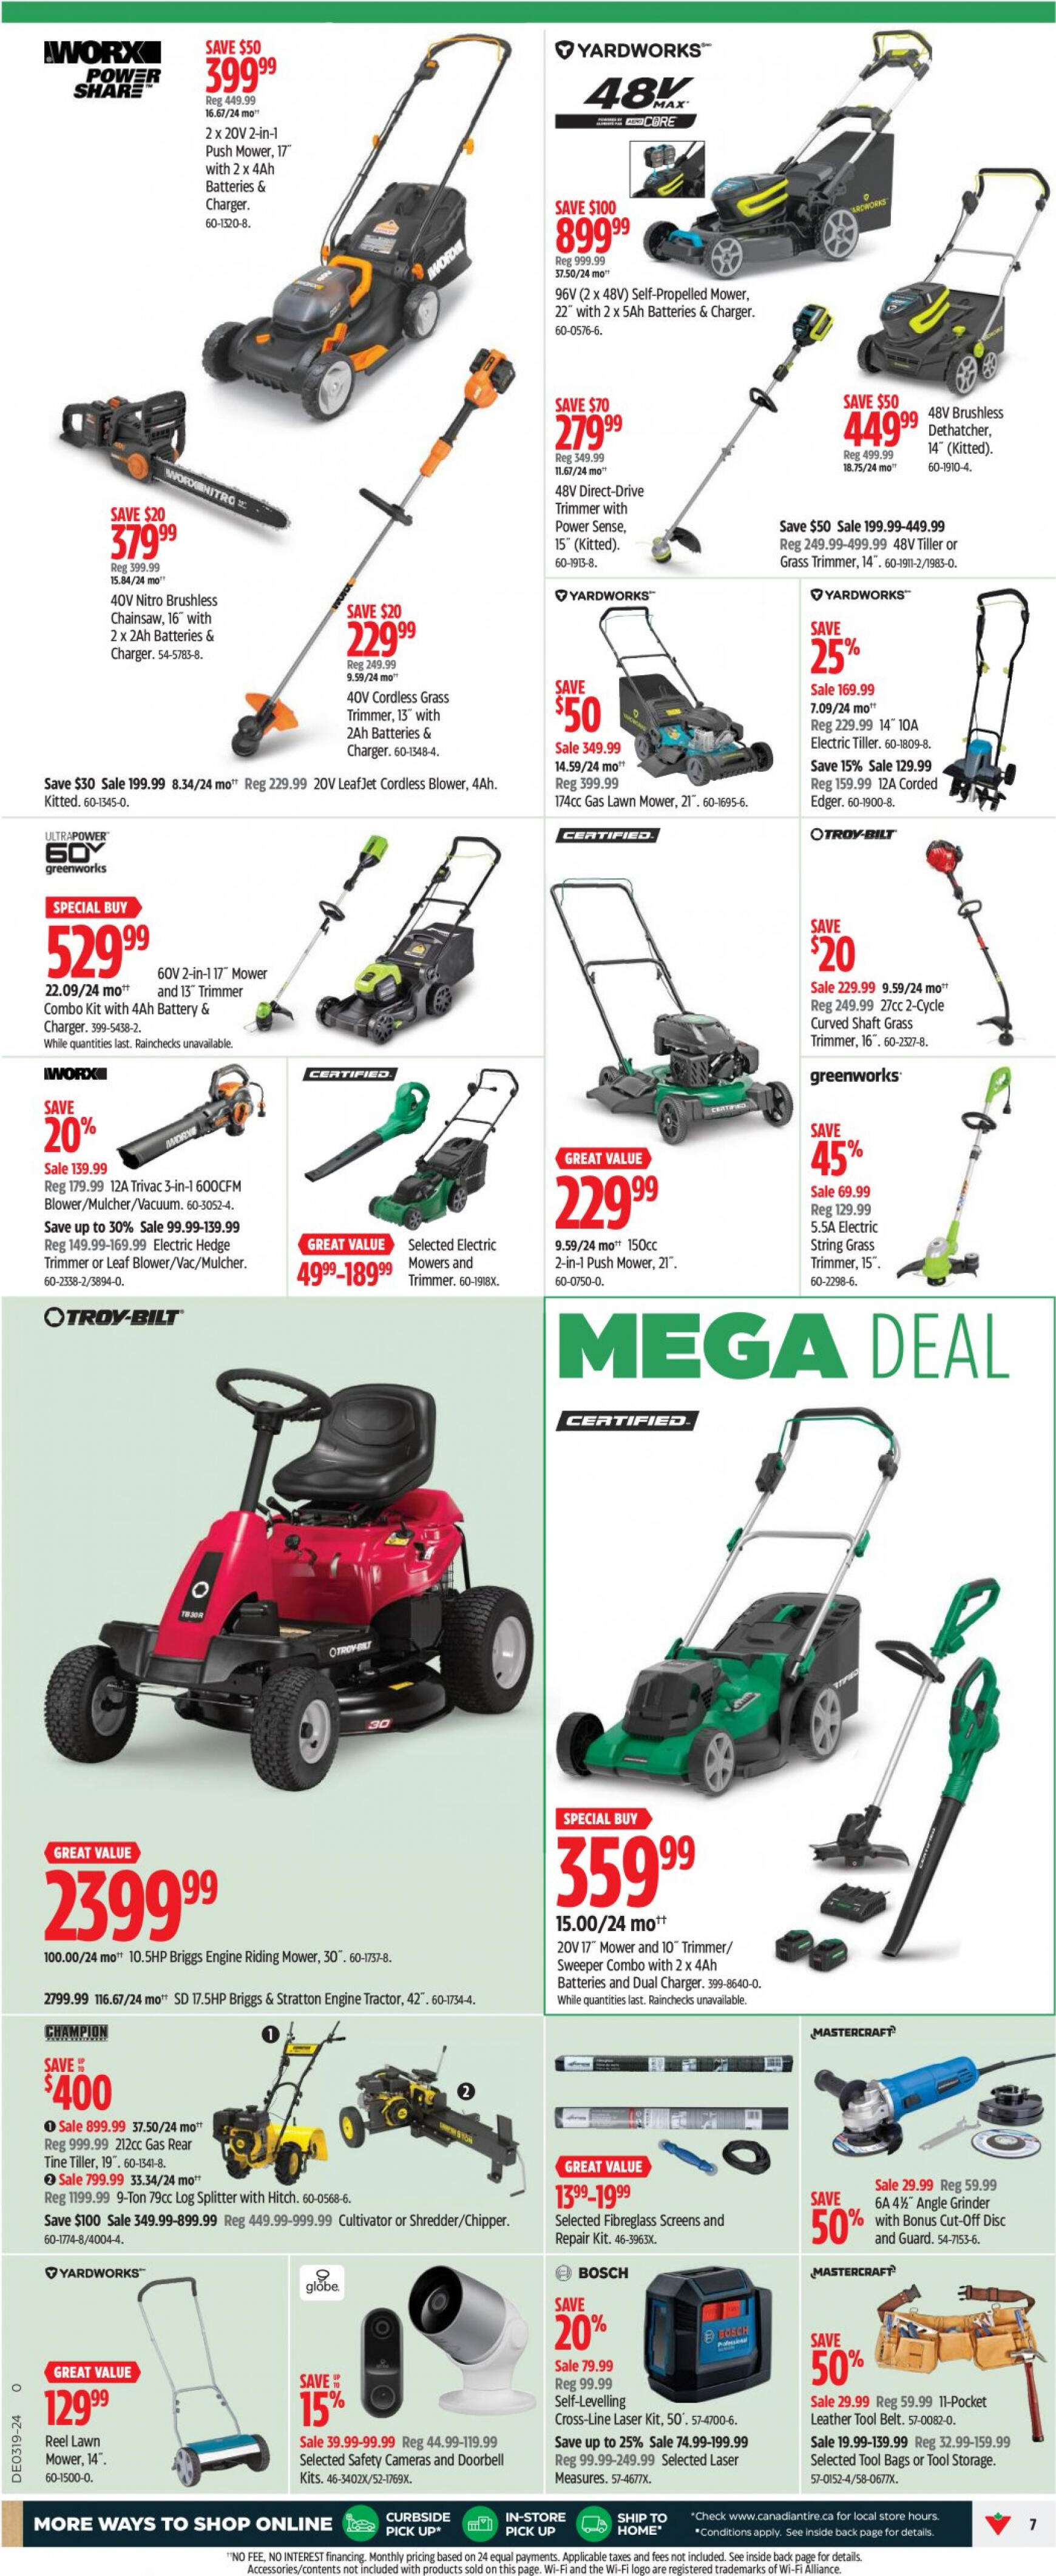 canadian-tire - Canadian Tire flyer current 02.05. - 08.05. - page: 7